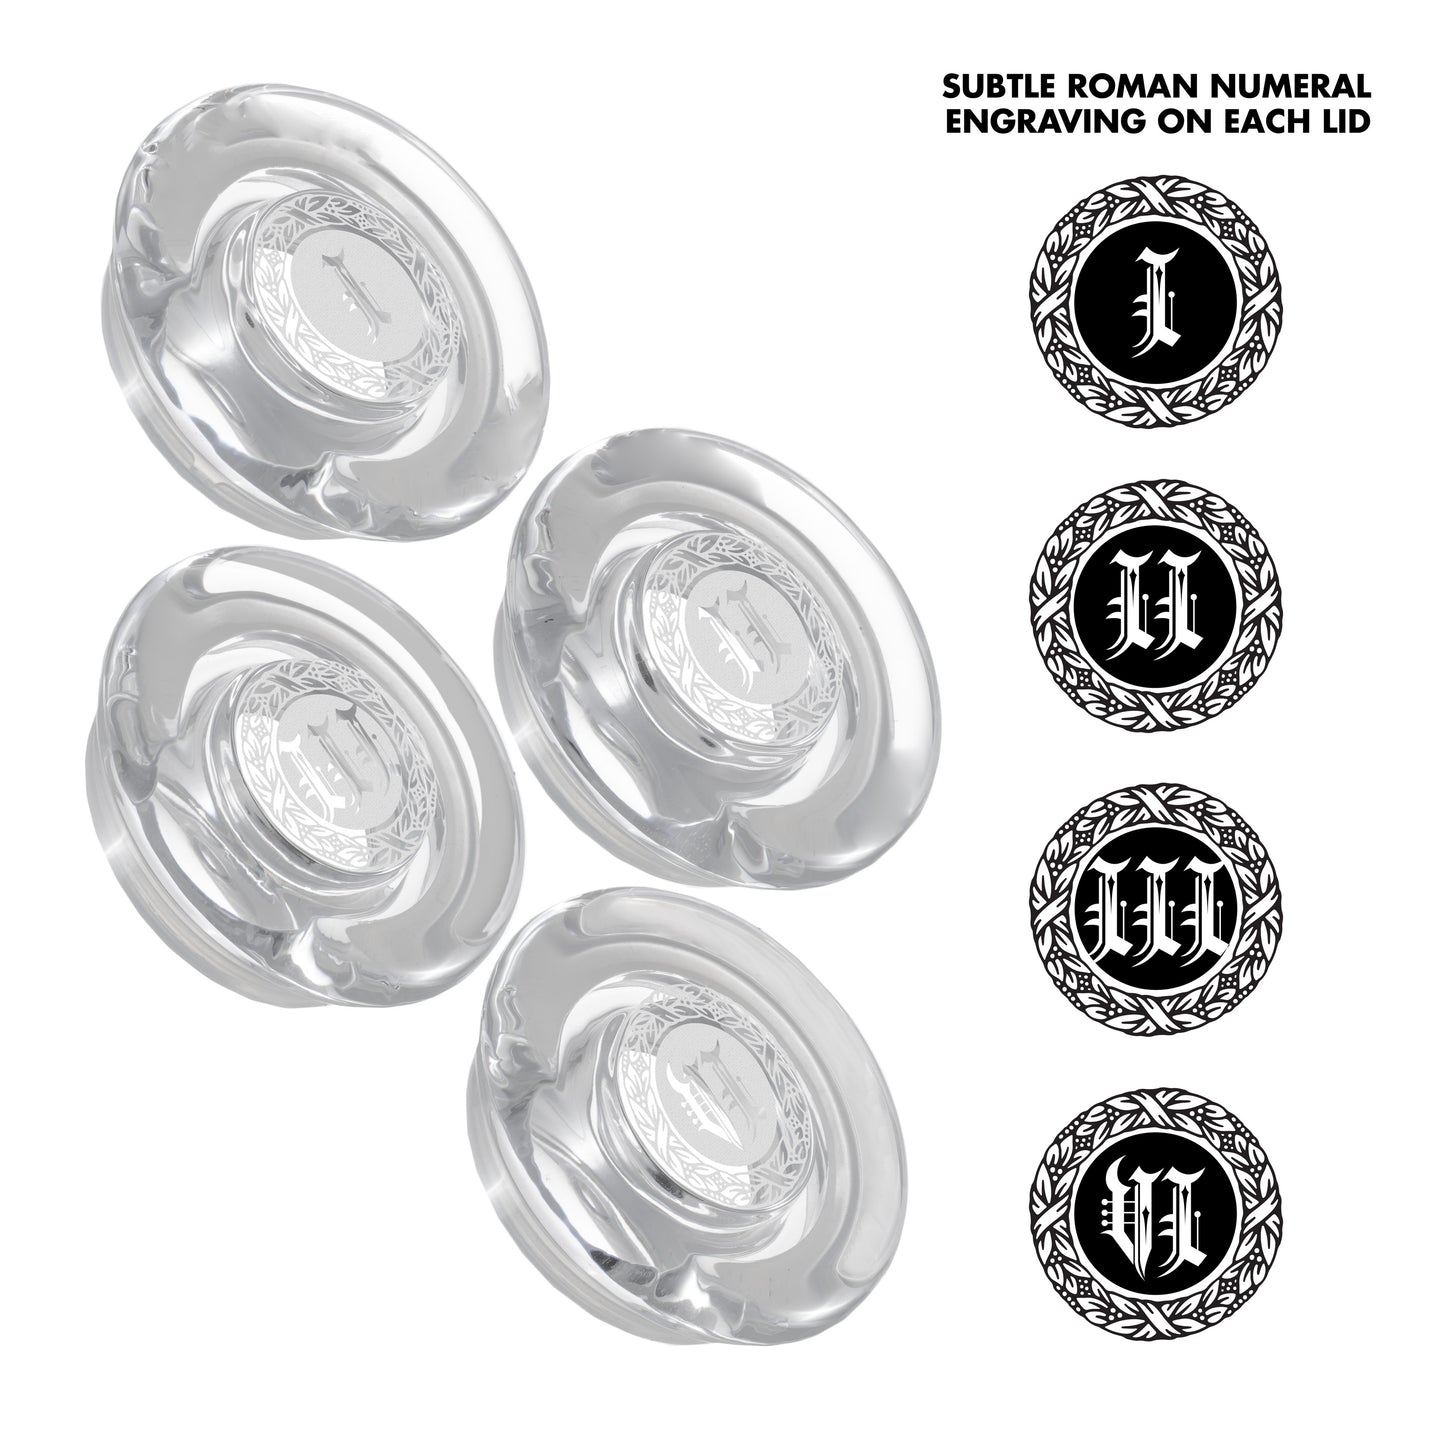 CairnCovers Glass Whiskey Glassware Lids - Glass Cap for Whisky Tasting Glasses by Cairn Craft (4 CairnCover Lids with Numeral Engraving)